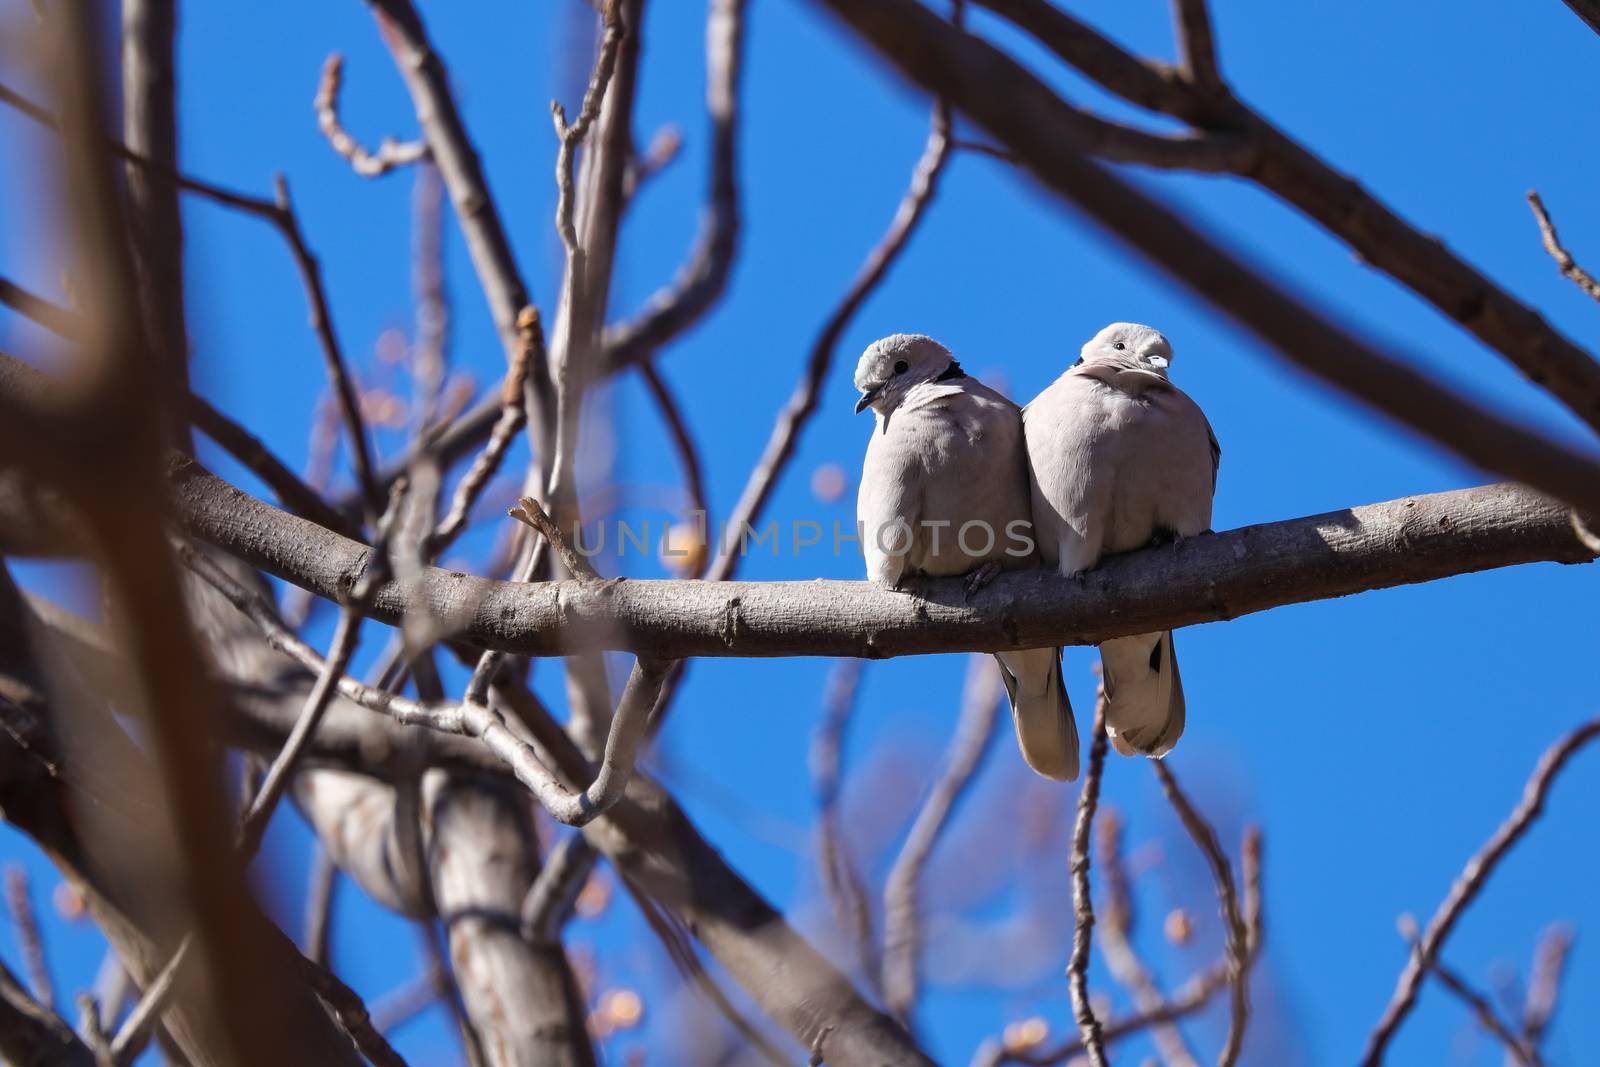 A pair of cape turtle doves (Streptopelia capicola) on branch in early spring, Pretoria, South Africa